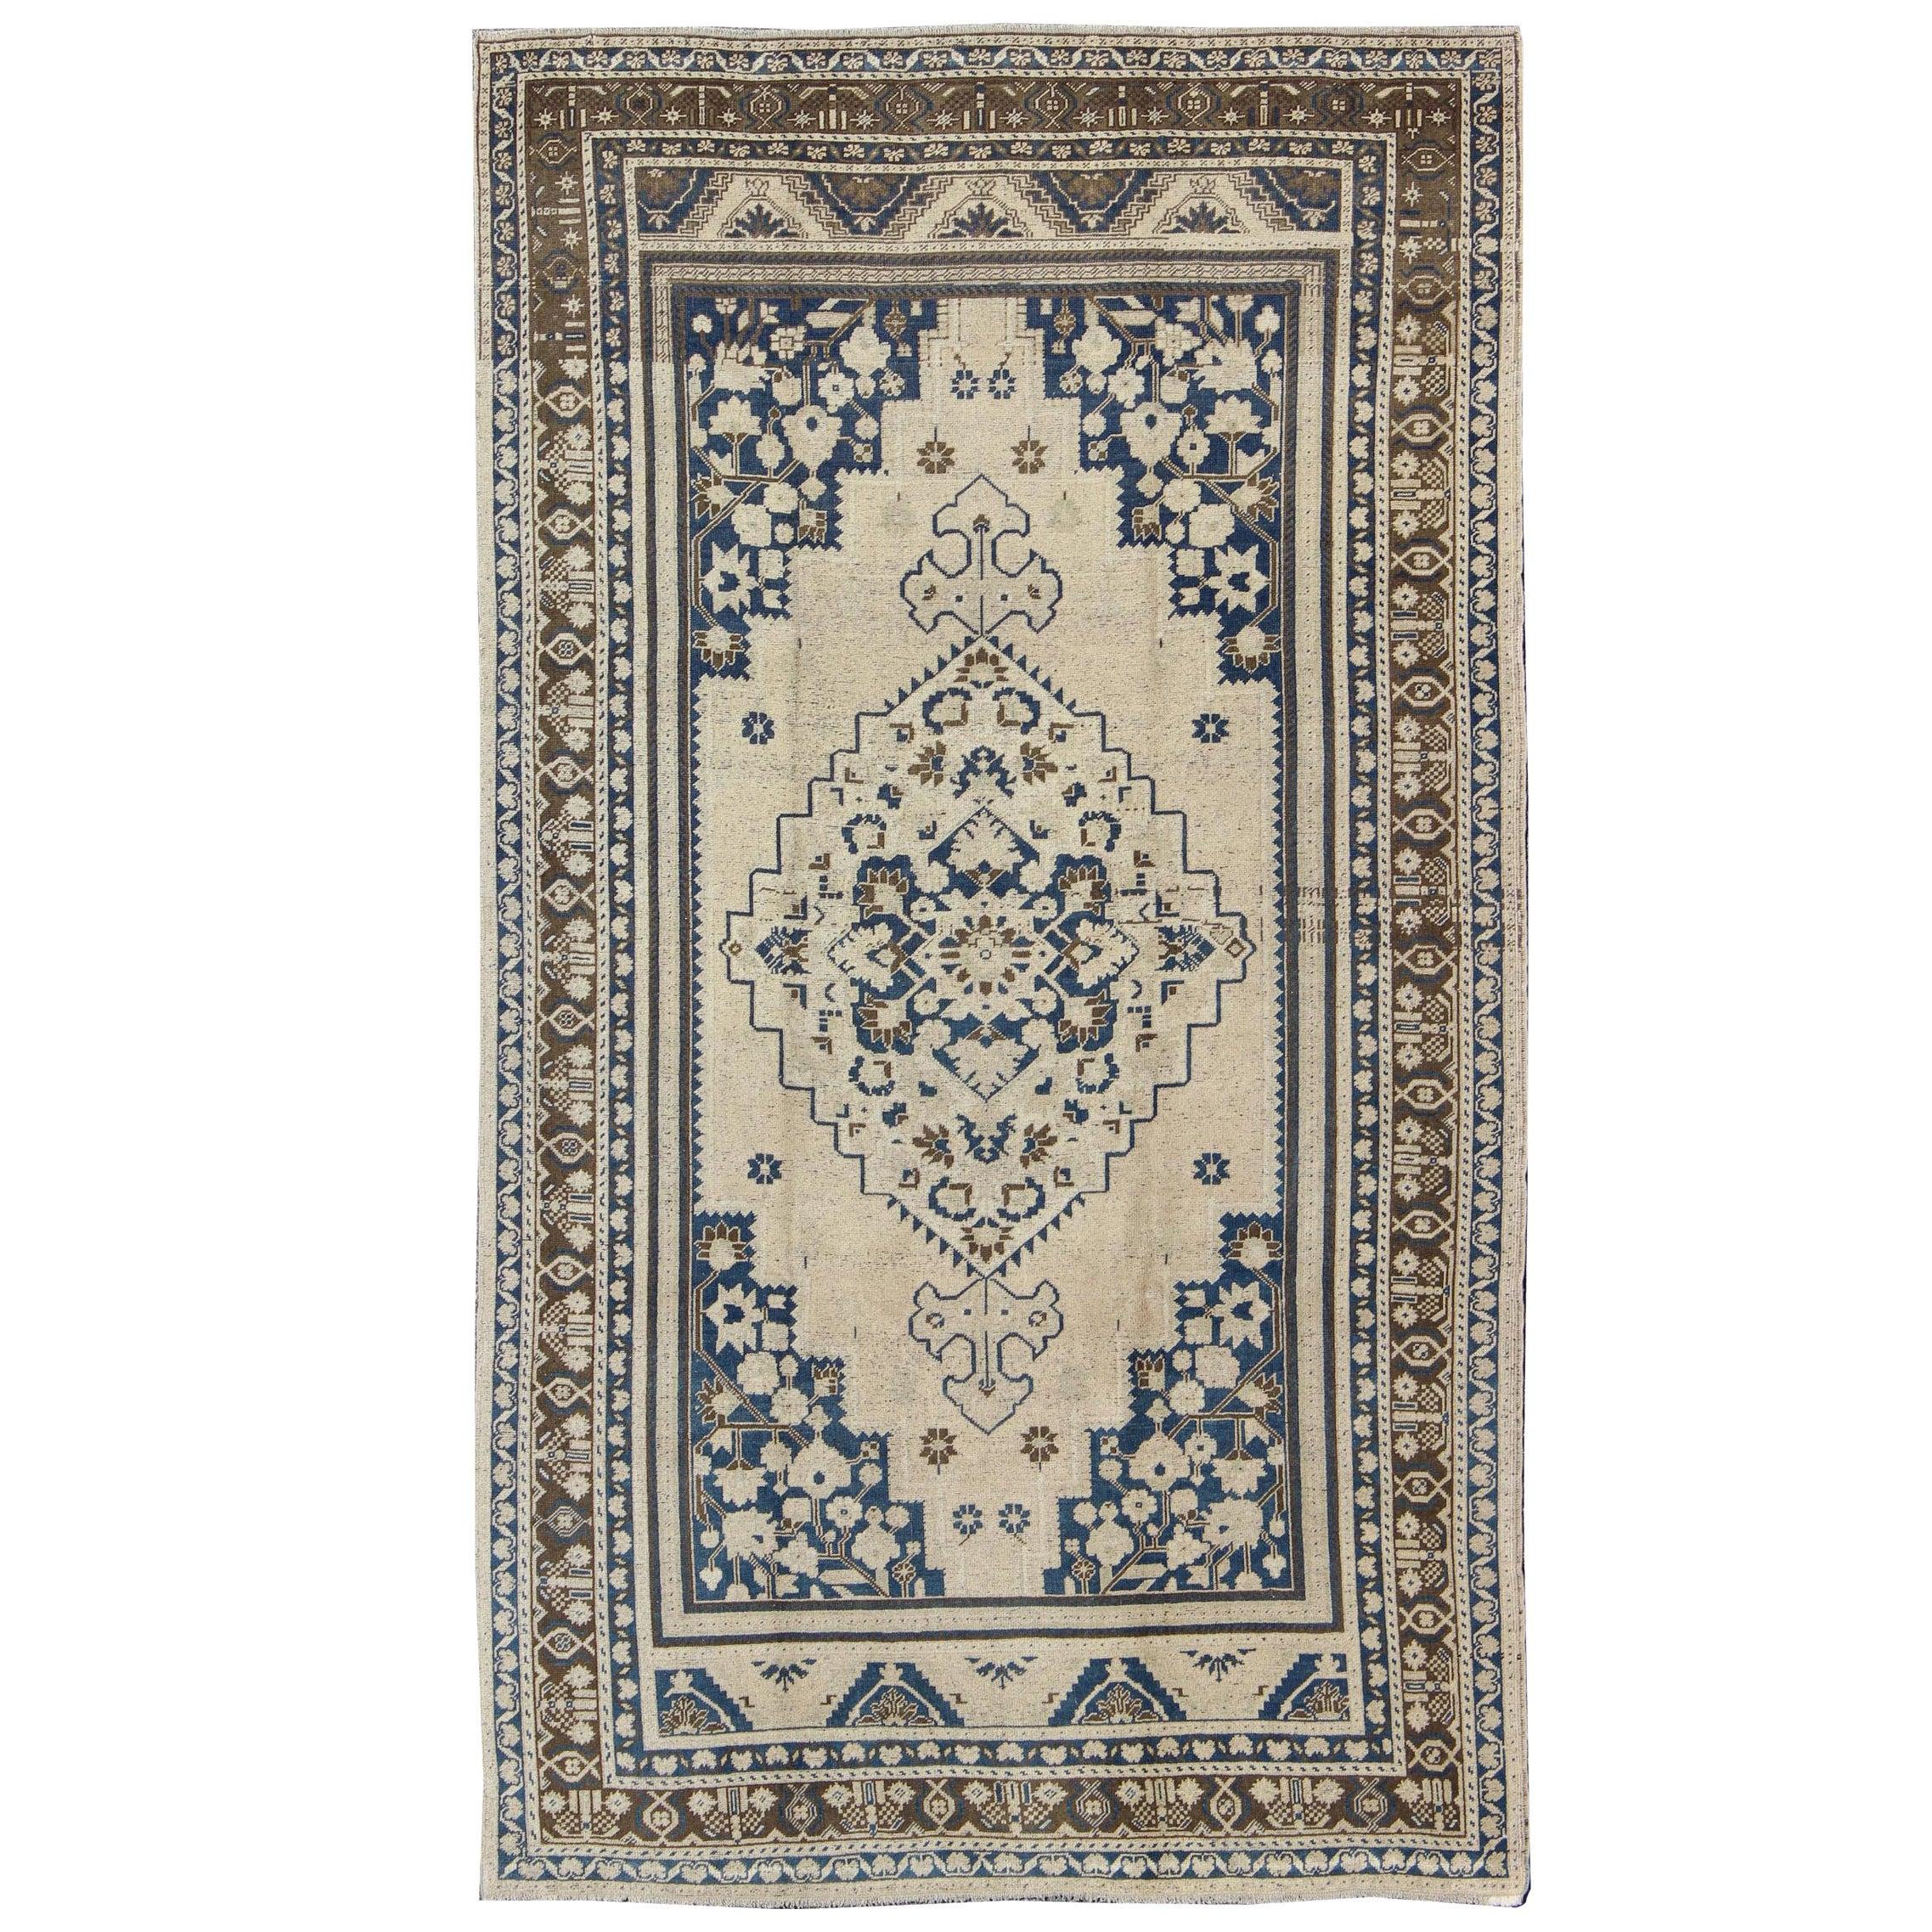 Vintage Turkish Oushak Rug with Denim Blue, Brown and Cream Colors